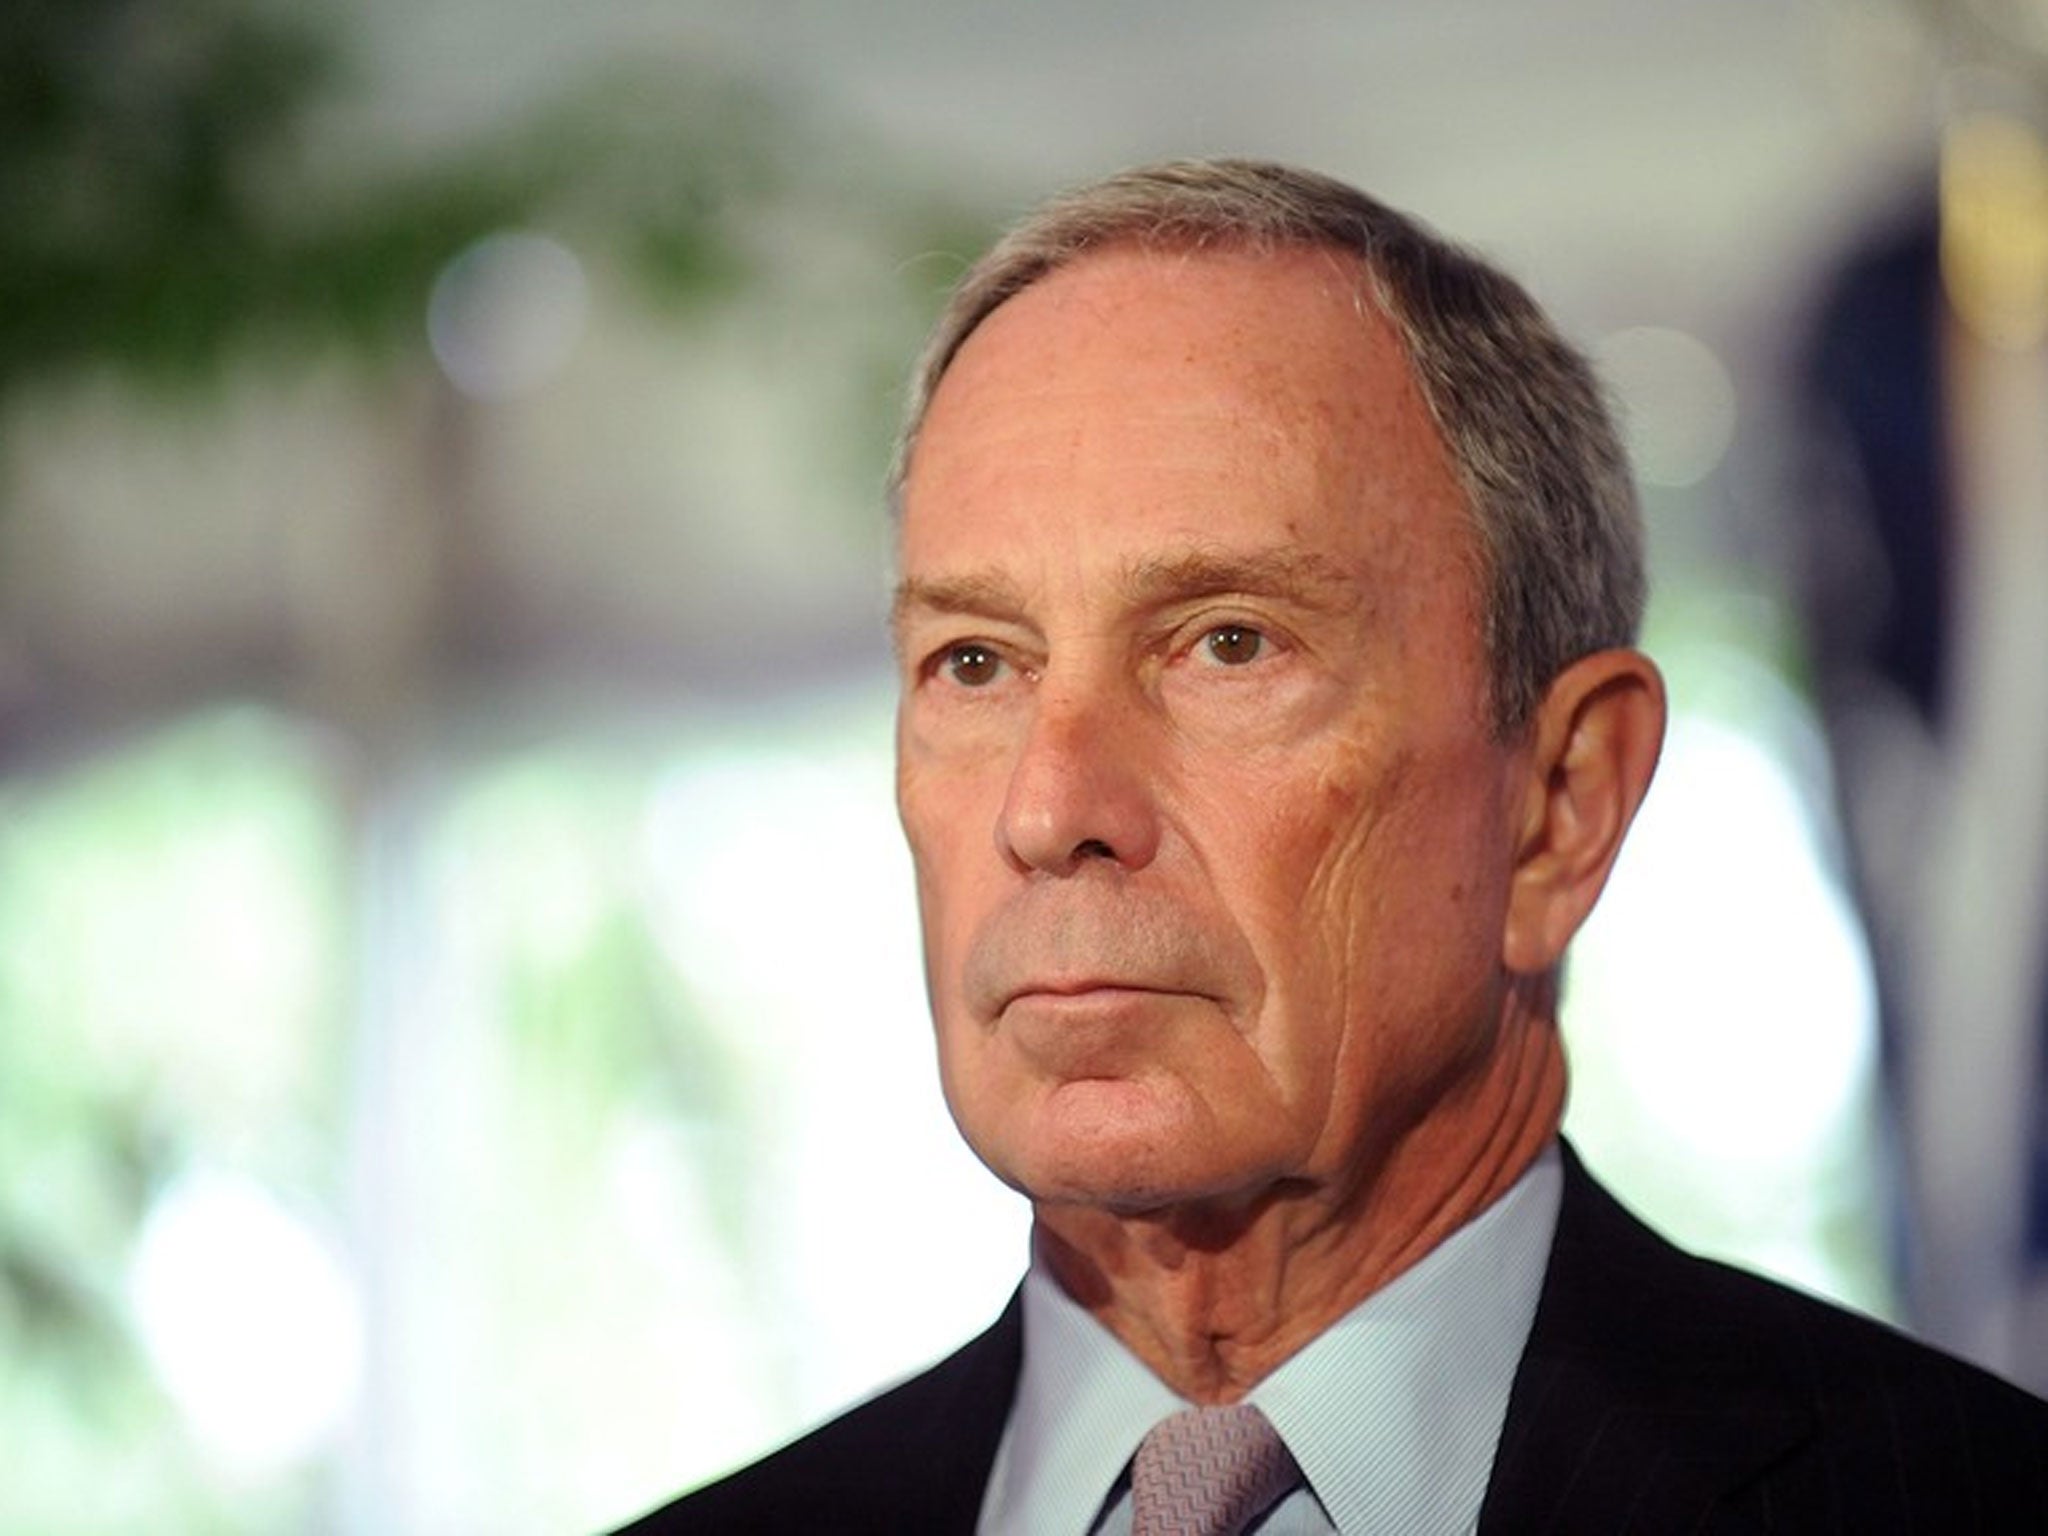 Two threatening letters sent to Michael Bloomberg contained traces of the deadly poison ricin